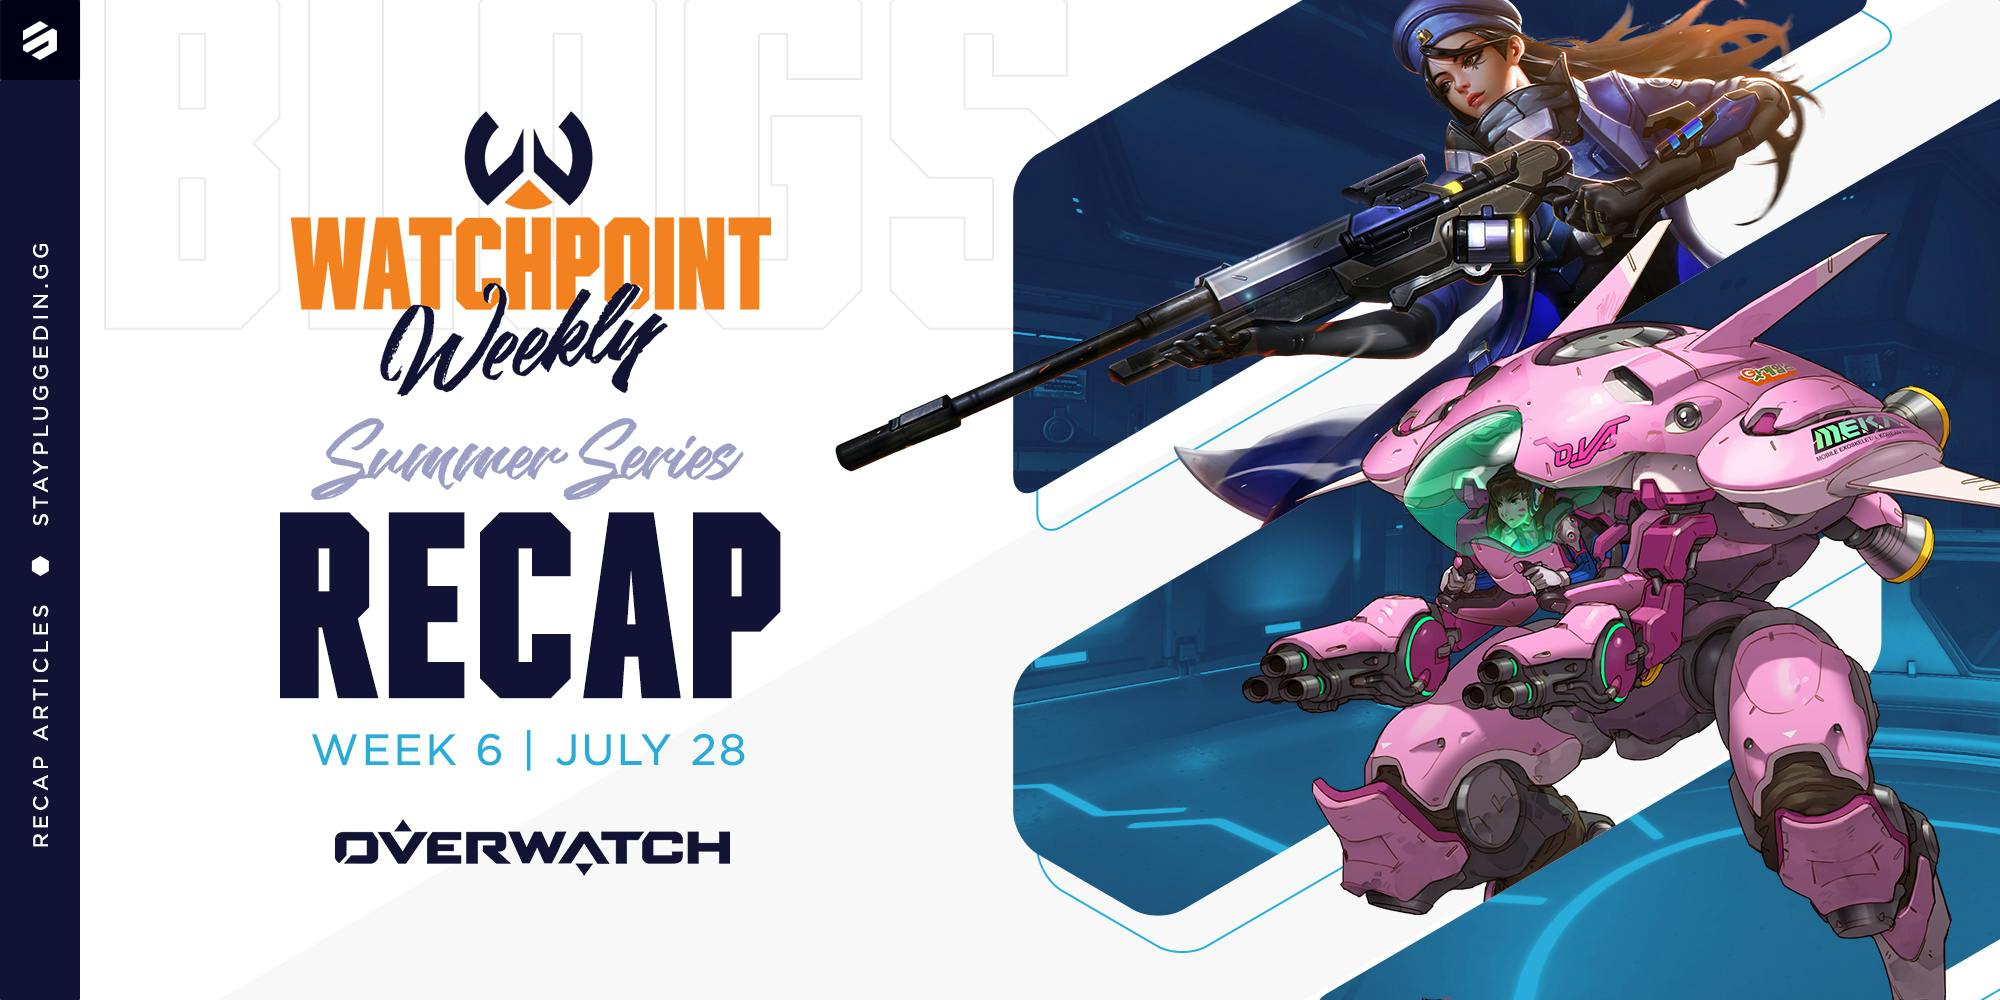 Watchpoint Weekly Summer Series | Season Recap & Invitational Preview